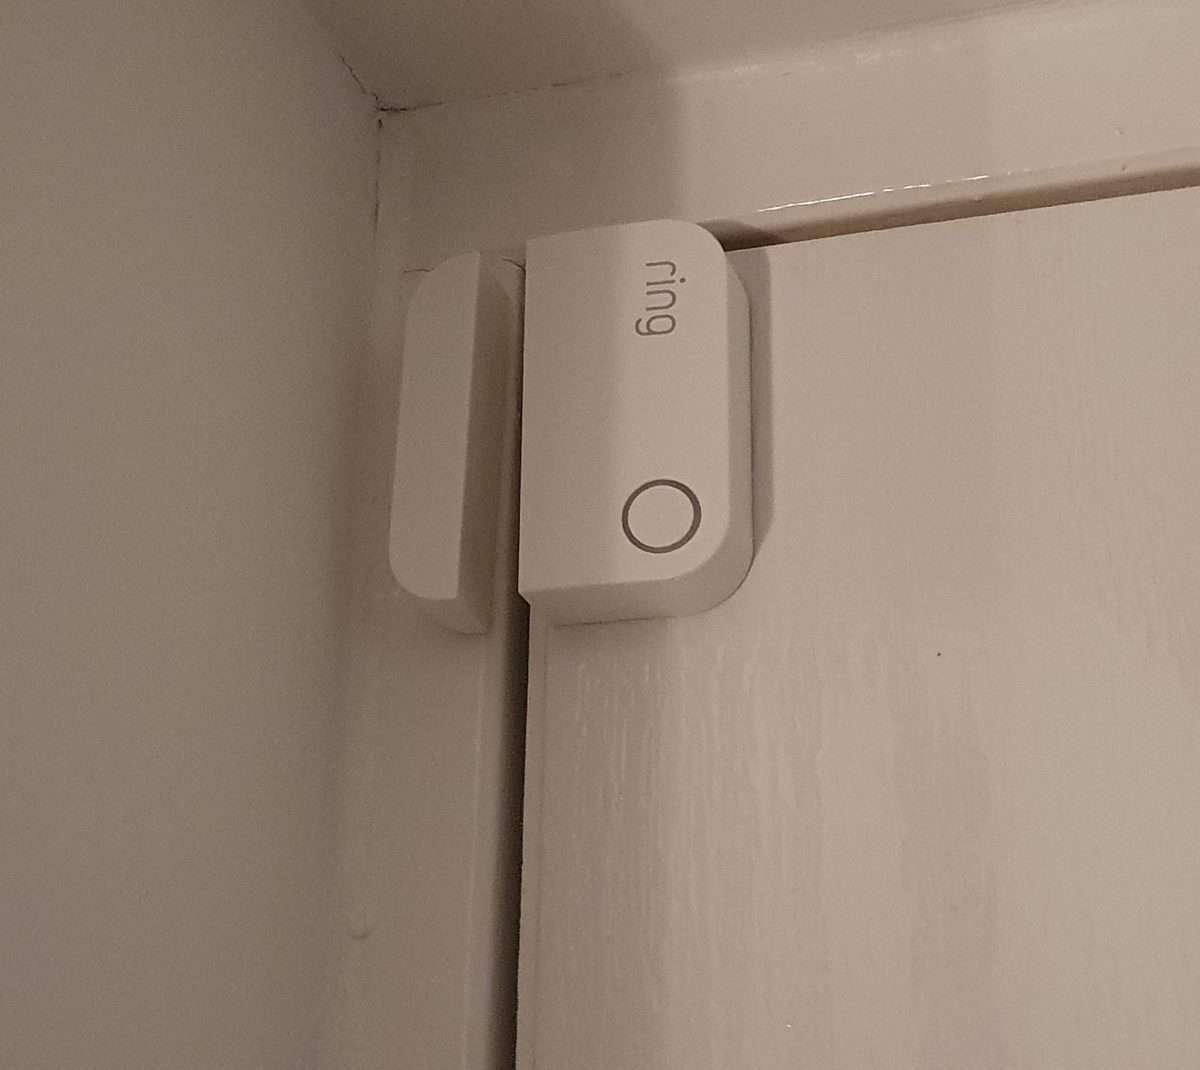 https://www.smarthomepoint.com/wp-content/uploads/2021/10/A-Ring-Contact-Sensor-installed-on-my-front-door.jpg